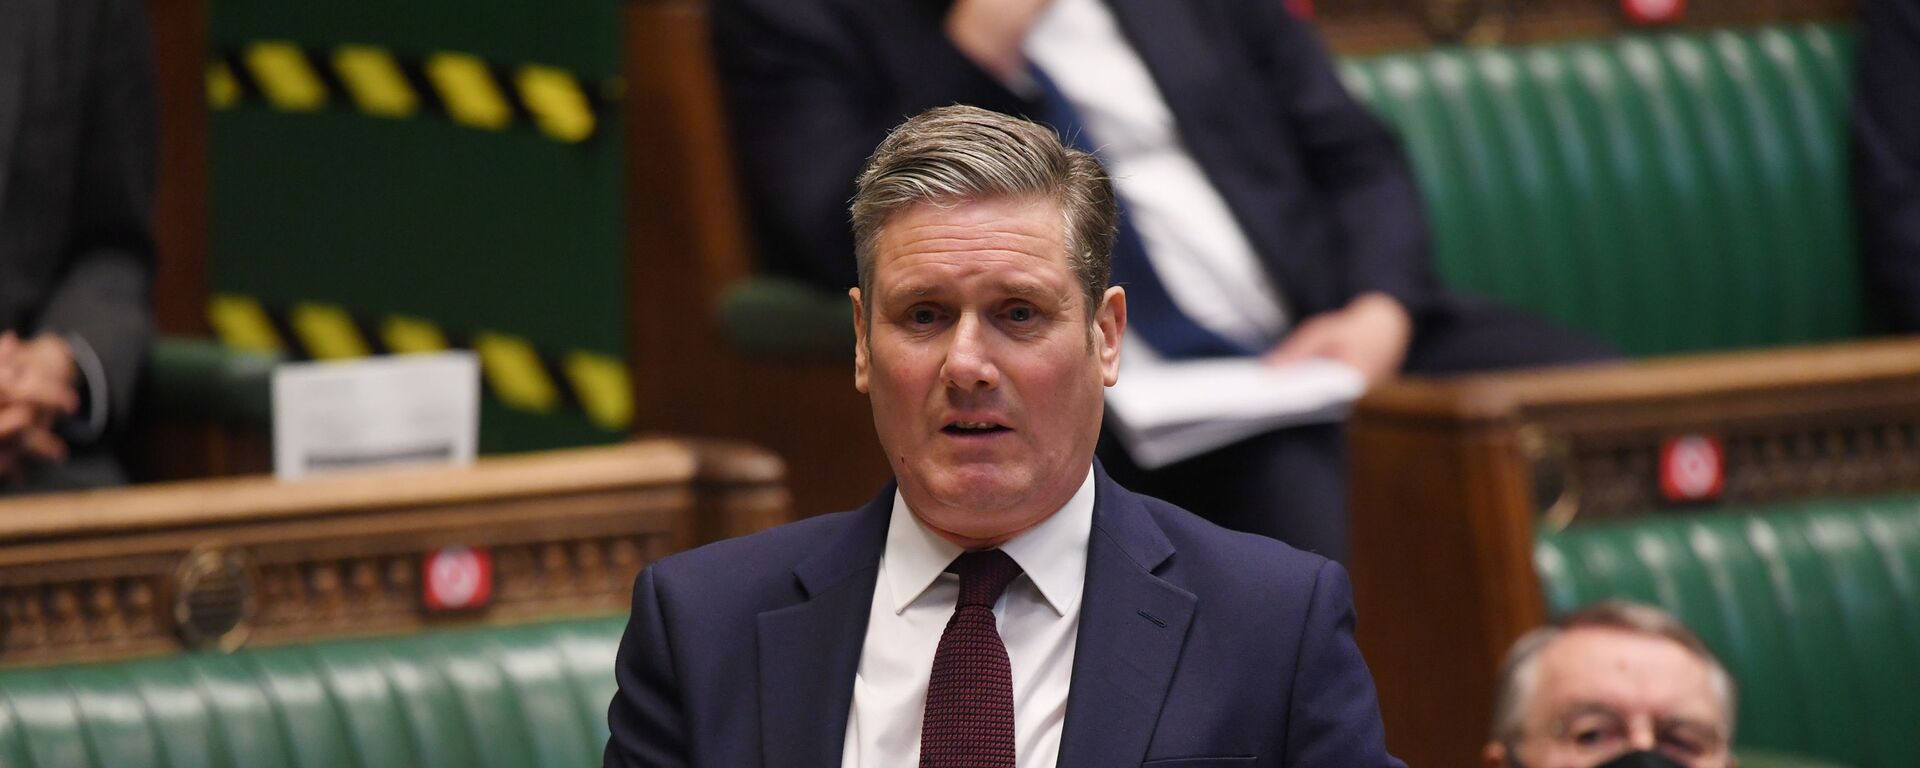 Britain's Labour Party leader, Keir Starmer speaks during a session in Parliament, in London - Sputnik International, 1920, 27.06.2021